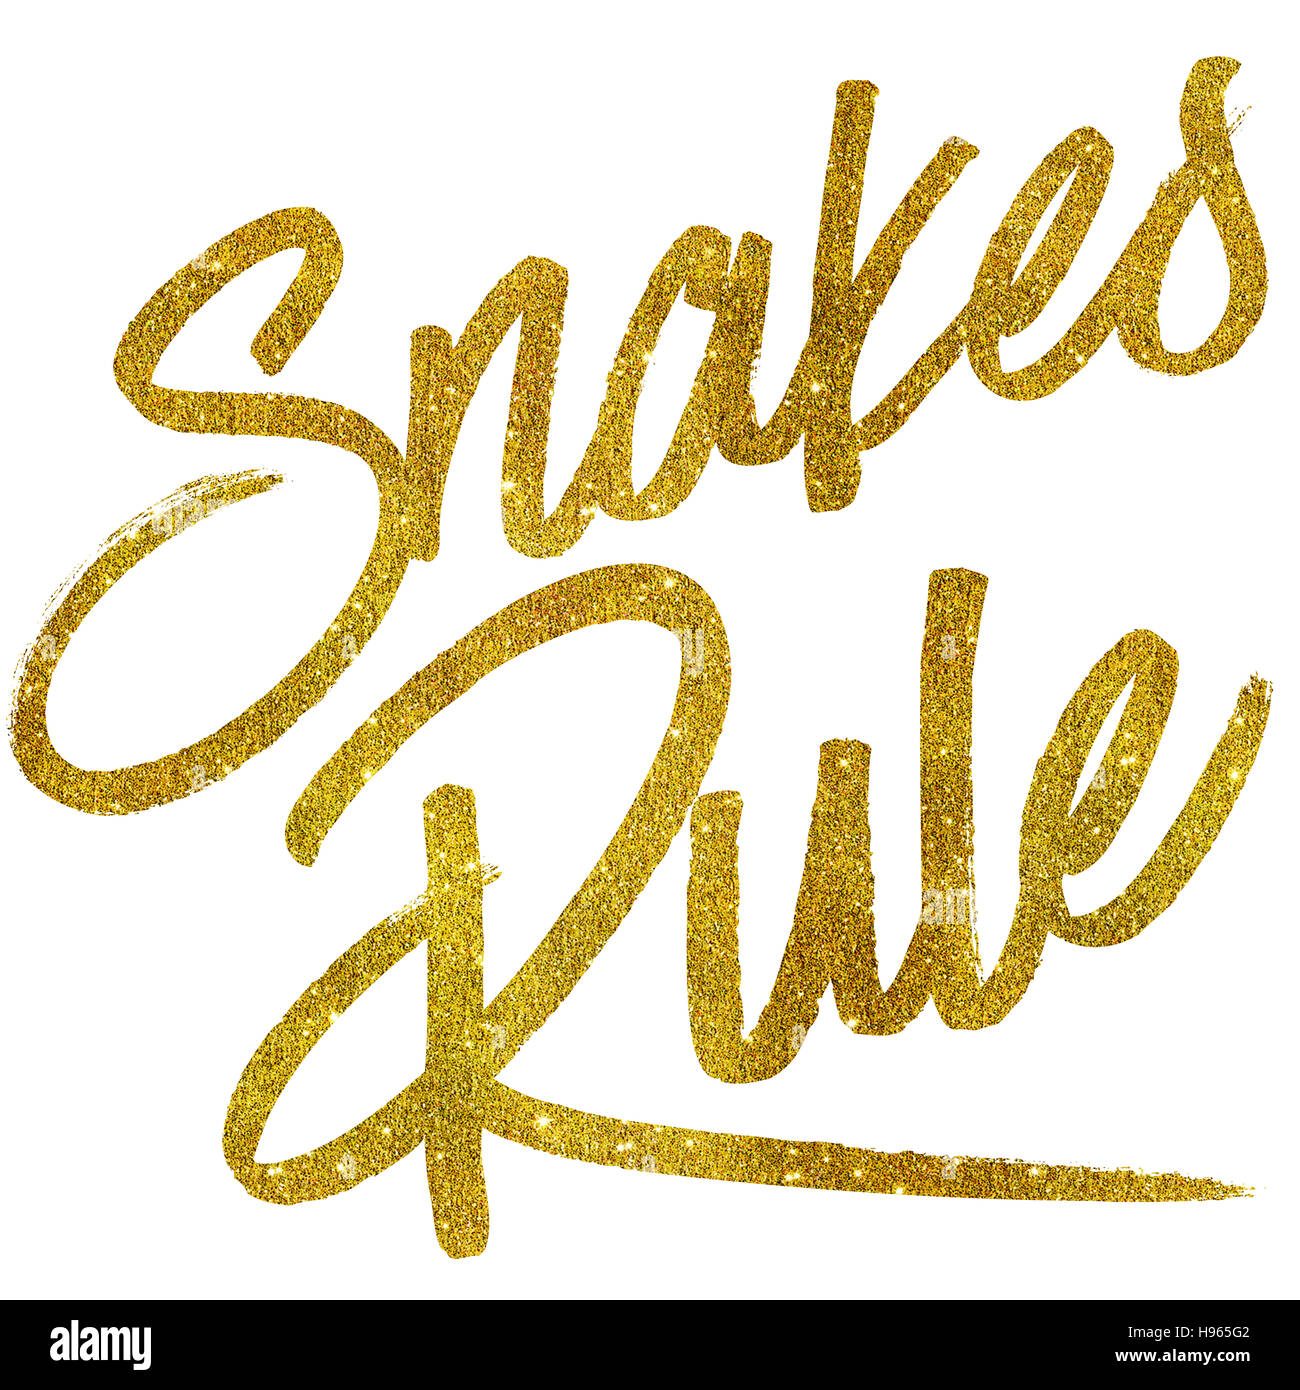 Snakes Rule Gold Faux Foil Metallic Glitter Quote Isolated Stock Photo